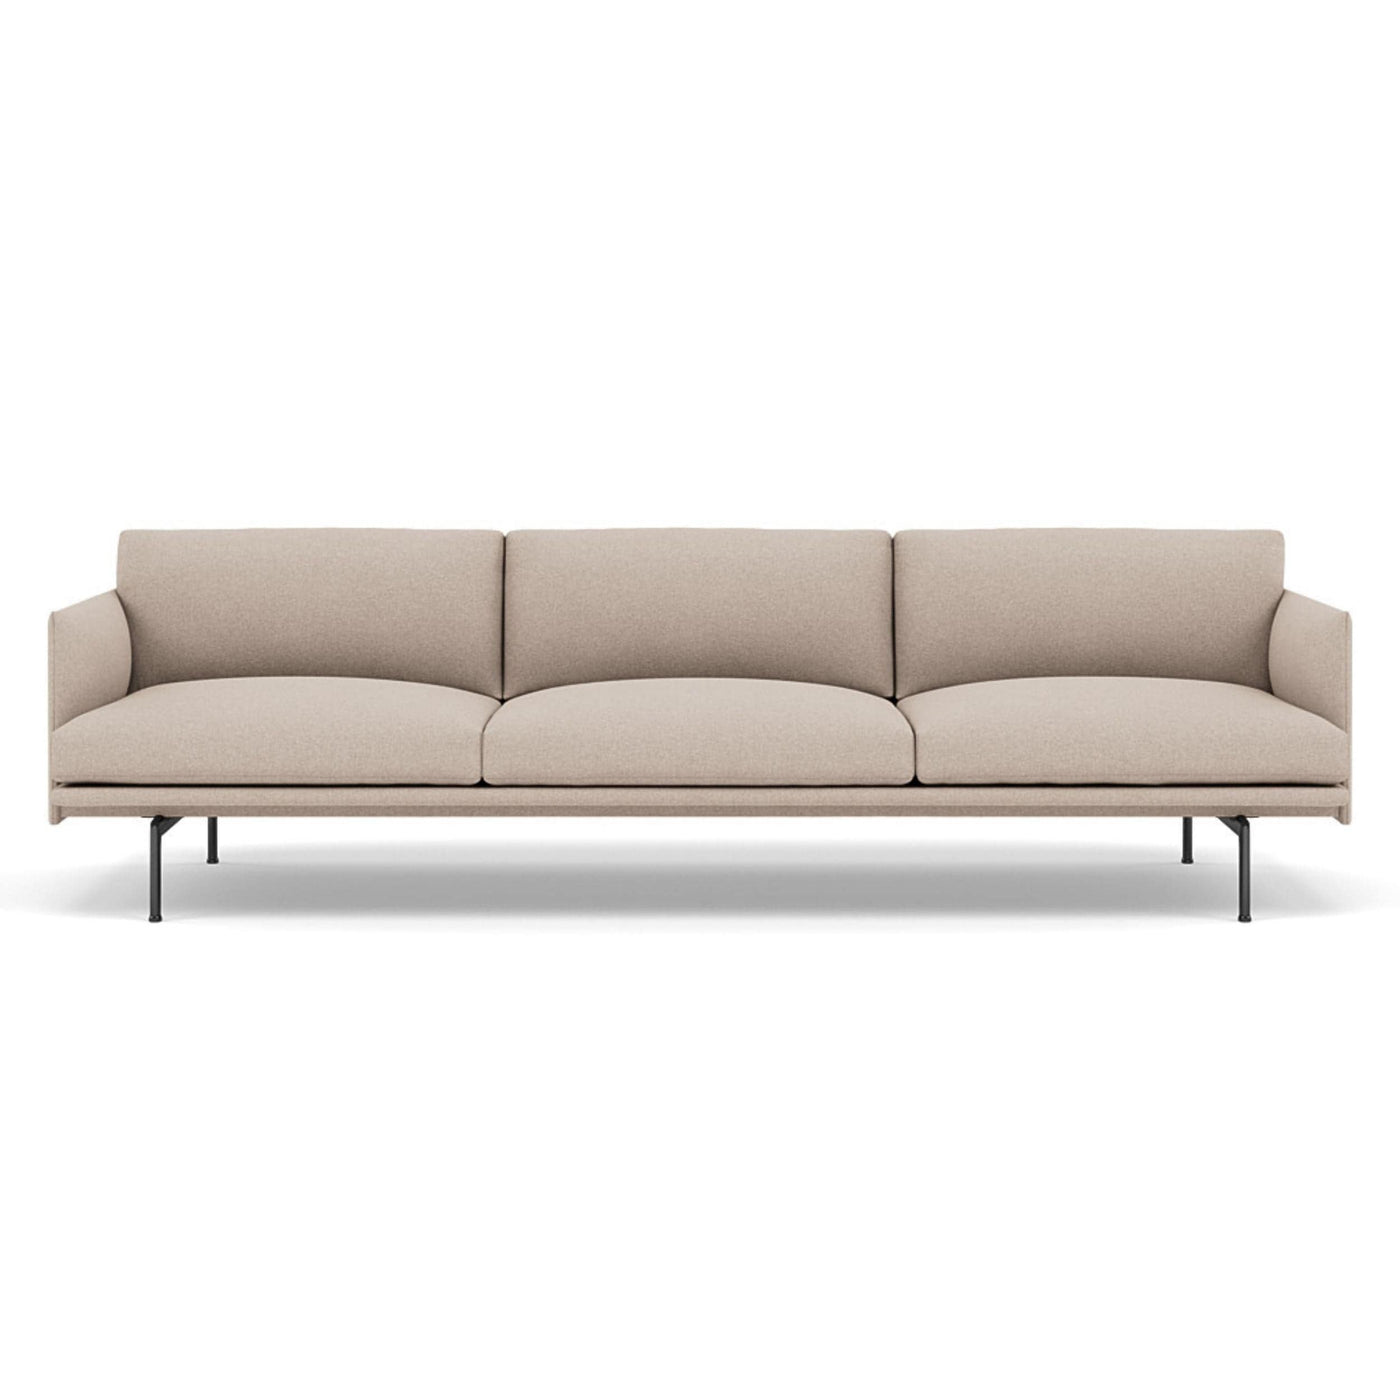 muuto outline 3.5 seater sofa in divina md 213 natural and black legs. Made to order from someday designs. #colour_divina-md-213-natural